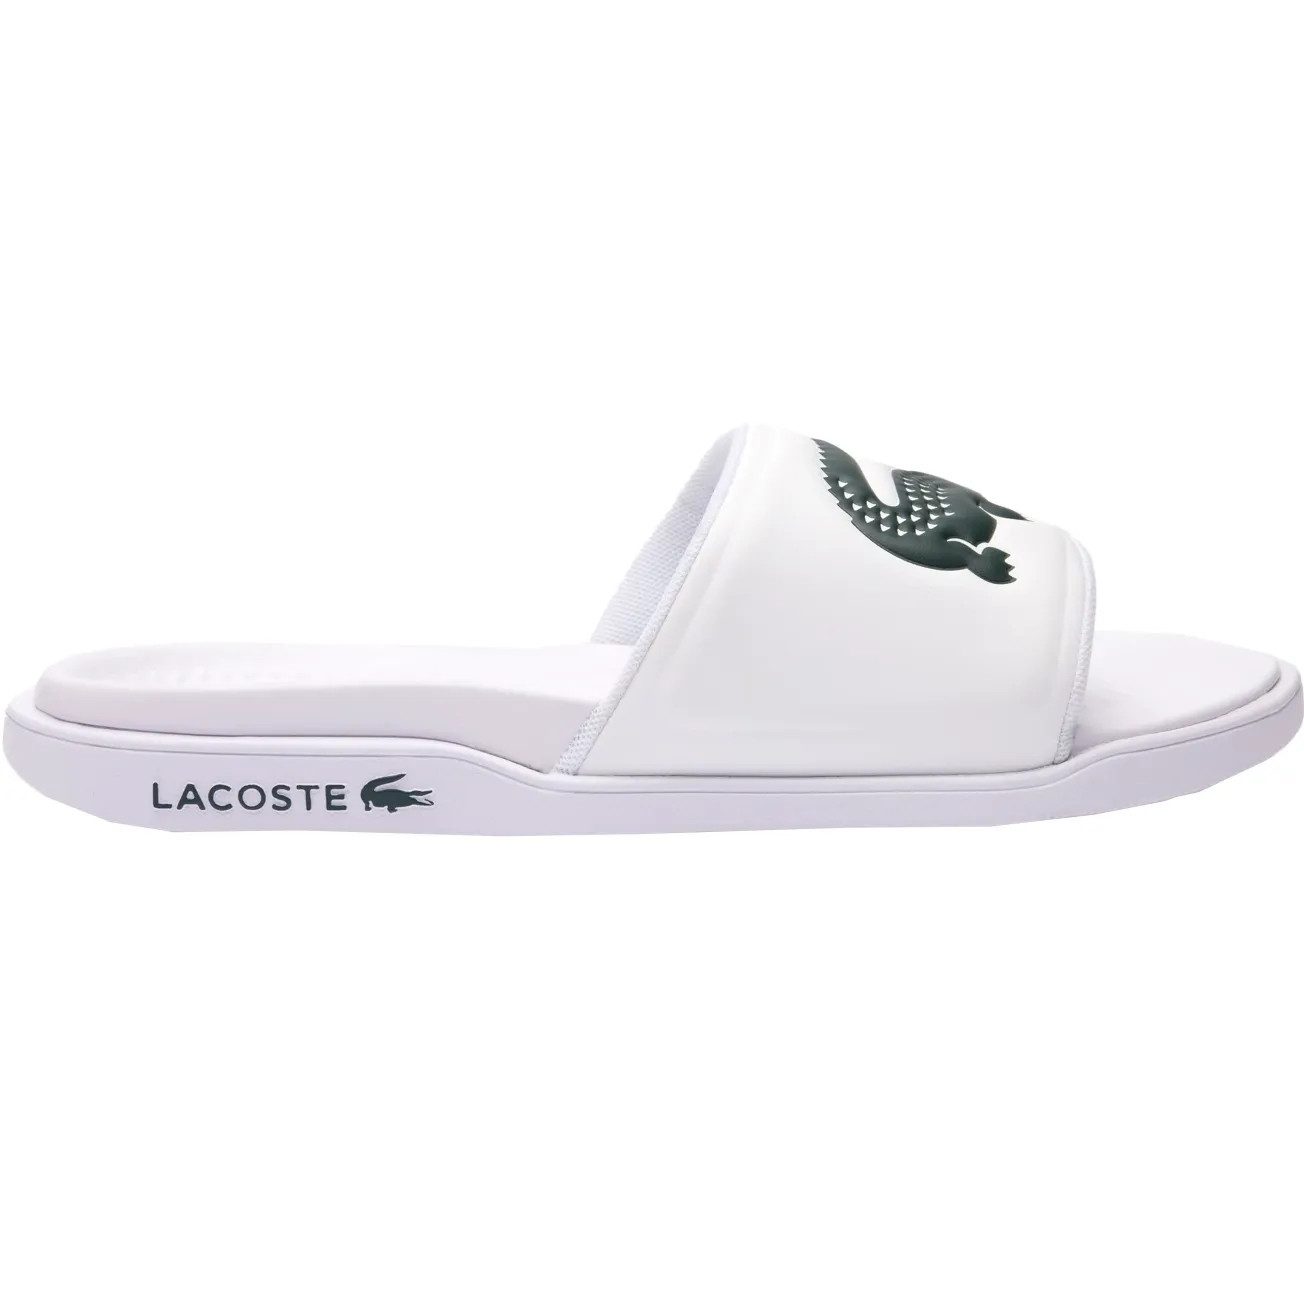 Lacoste Lacoste Serve Dual Synthetic Slides Badeschuh